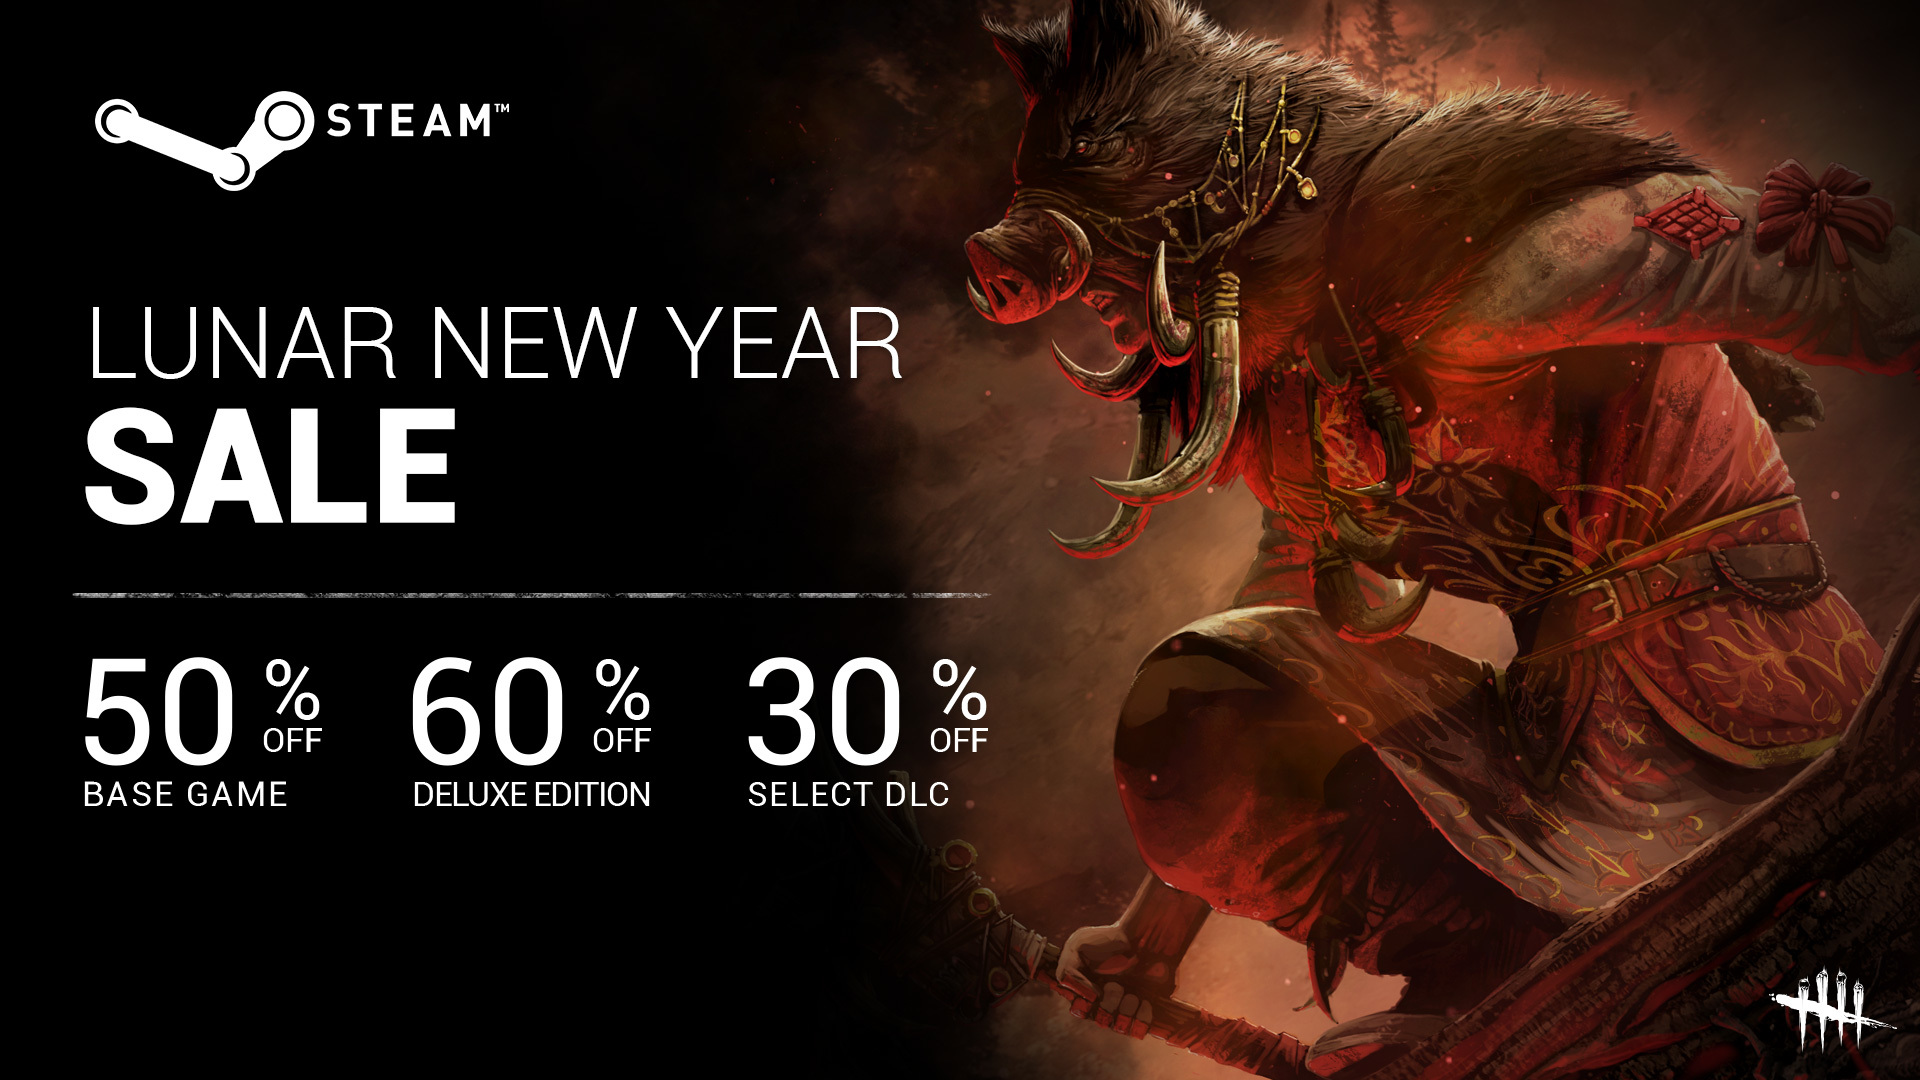 Dead By Daylight The Lunar New Year Sale Has Started On Steam Steam News